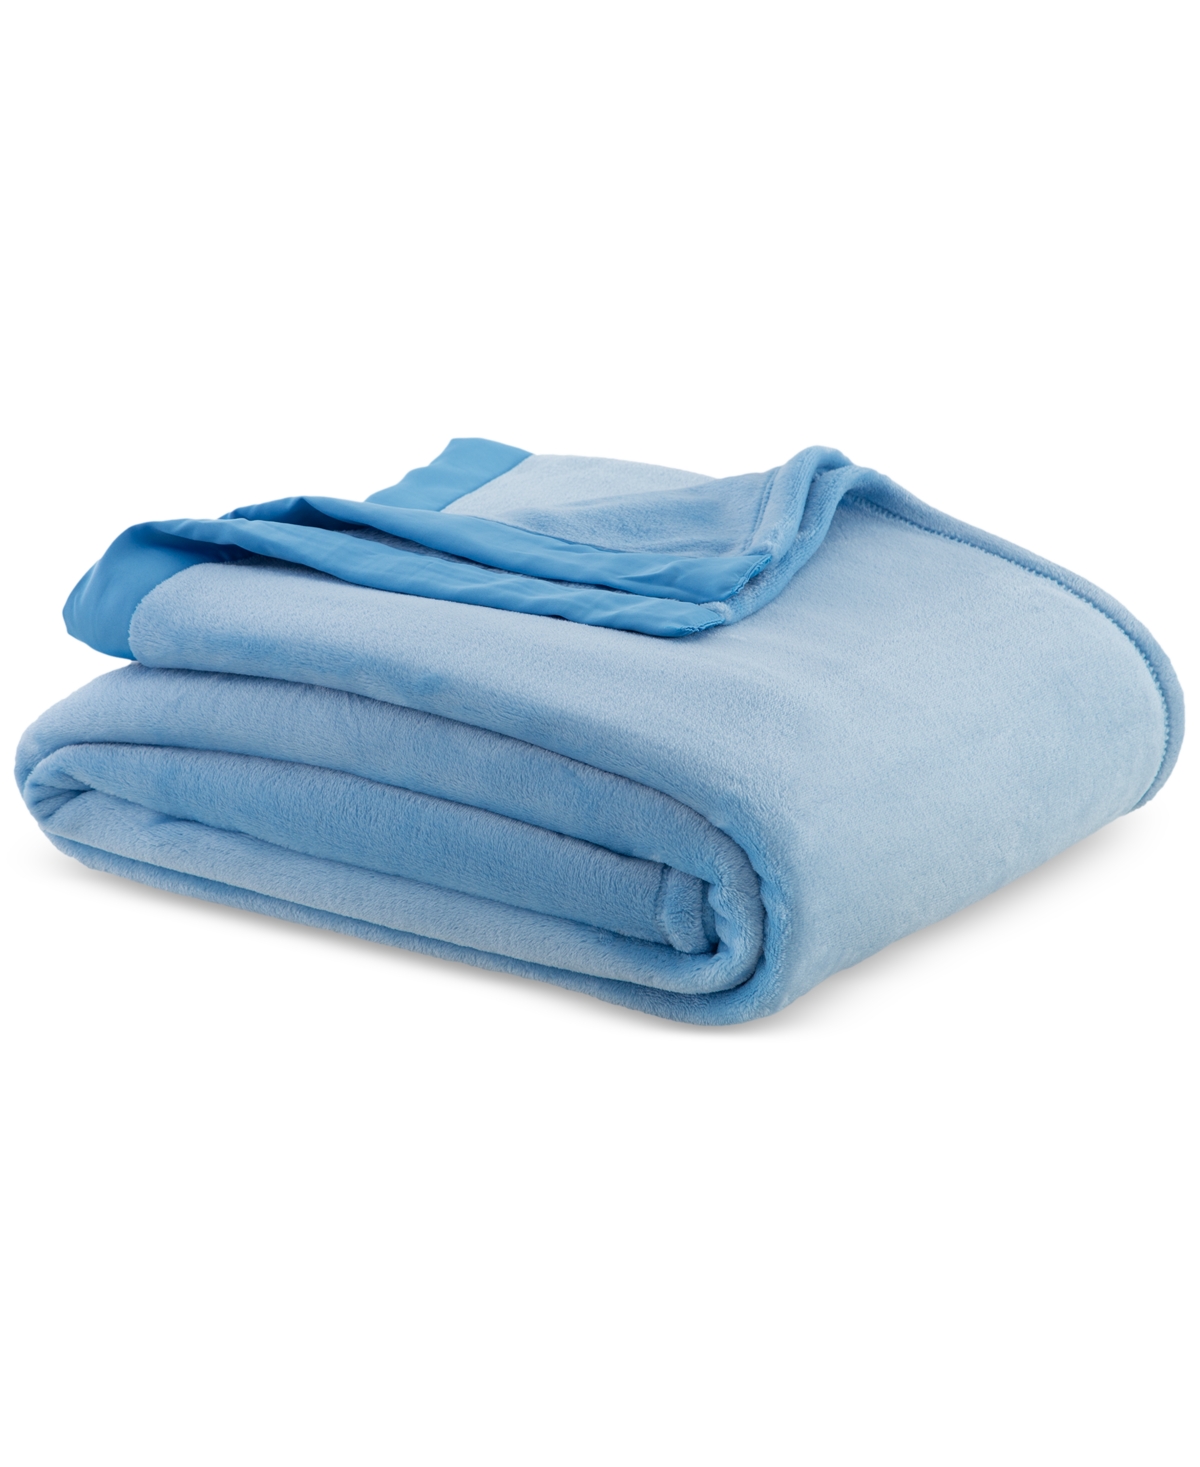 Berkshire Classic Velvety Plush Blanket, Twin, Created For Macy's In Blue Plate